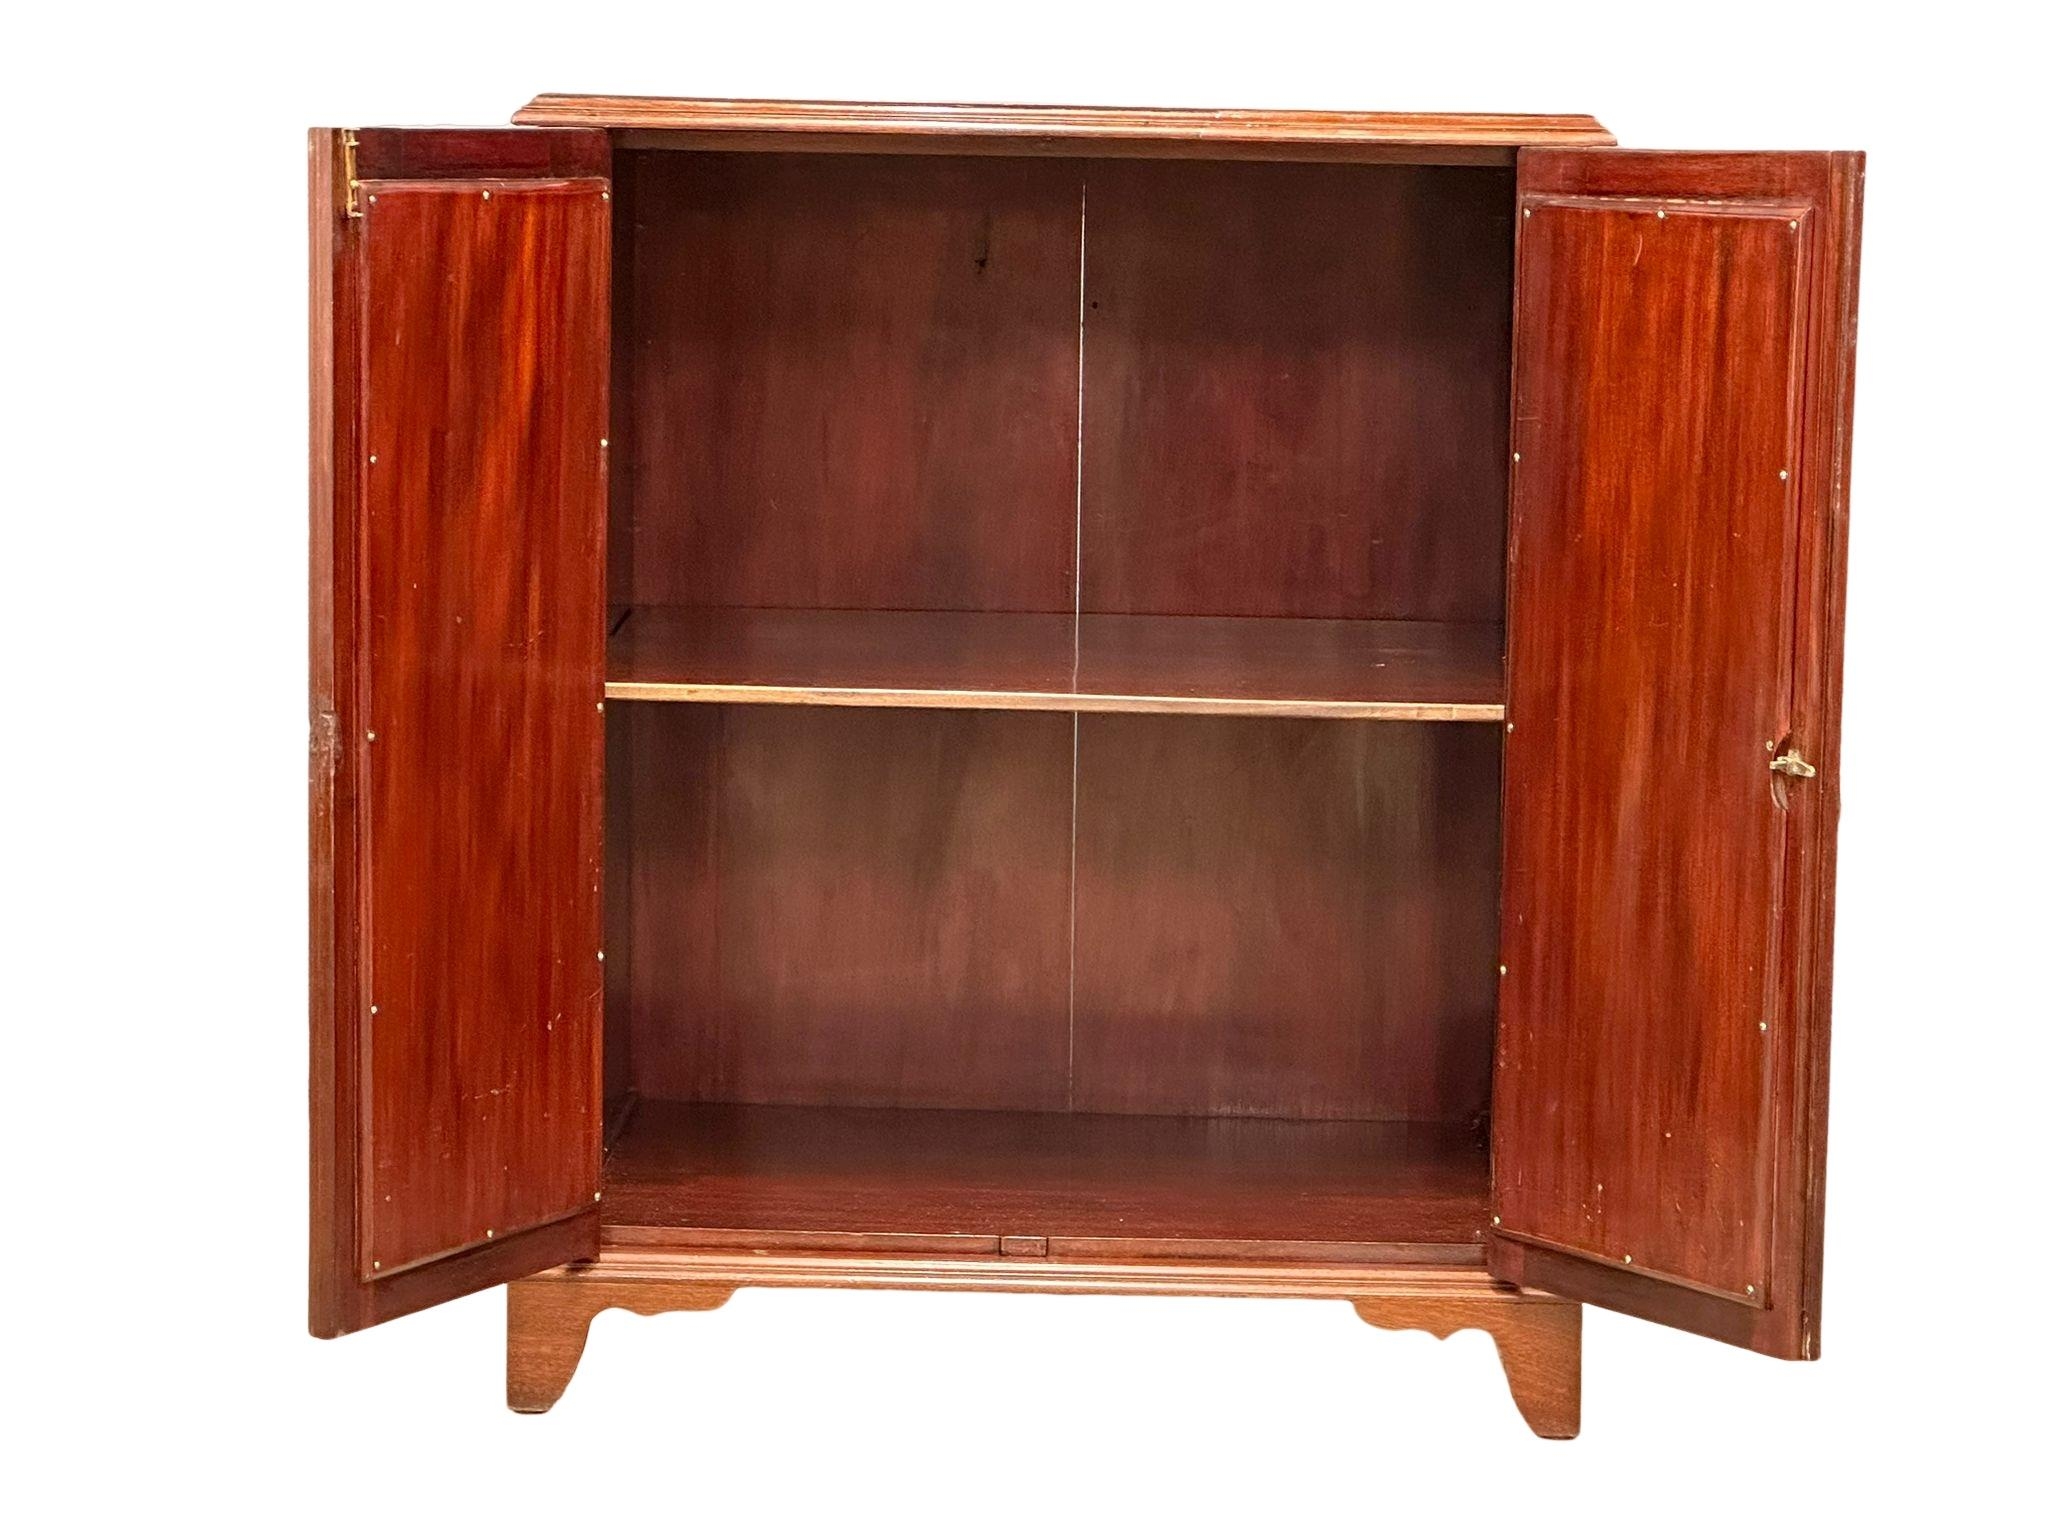 A late 19th century Sheraton Revival inlaid mahogany linen cupboard/ side cabinet. Circa 1890- - Image 2 of 7